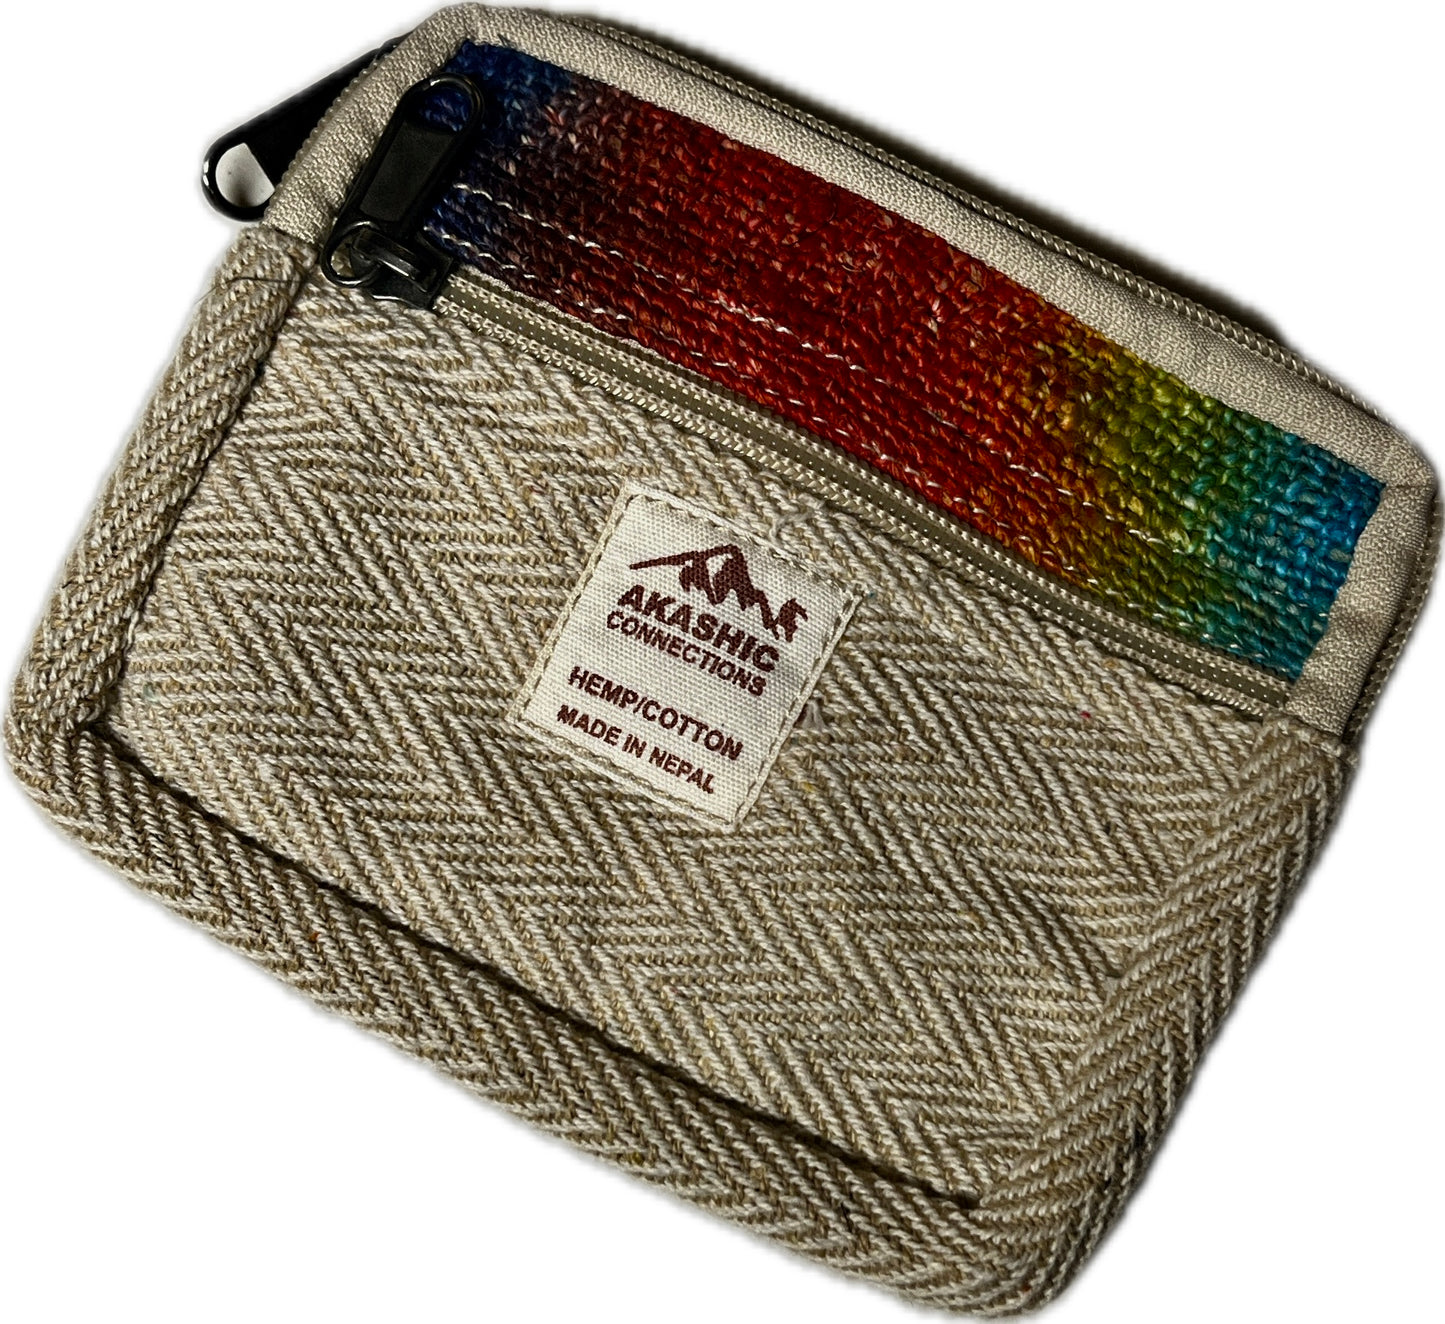 Steal Your Face hemp pouch